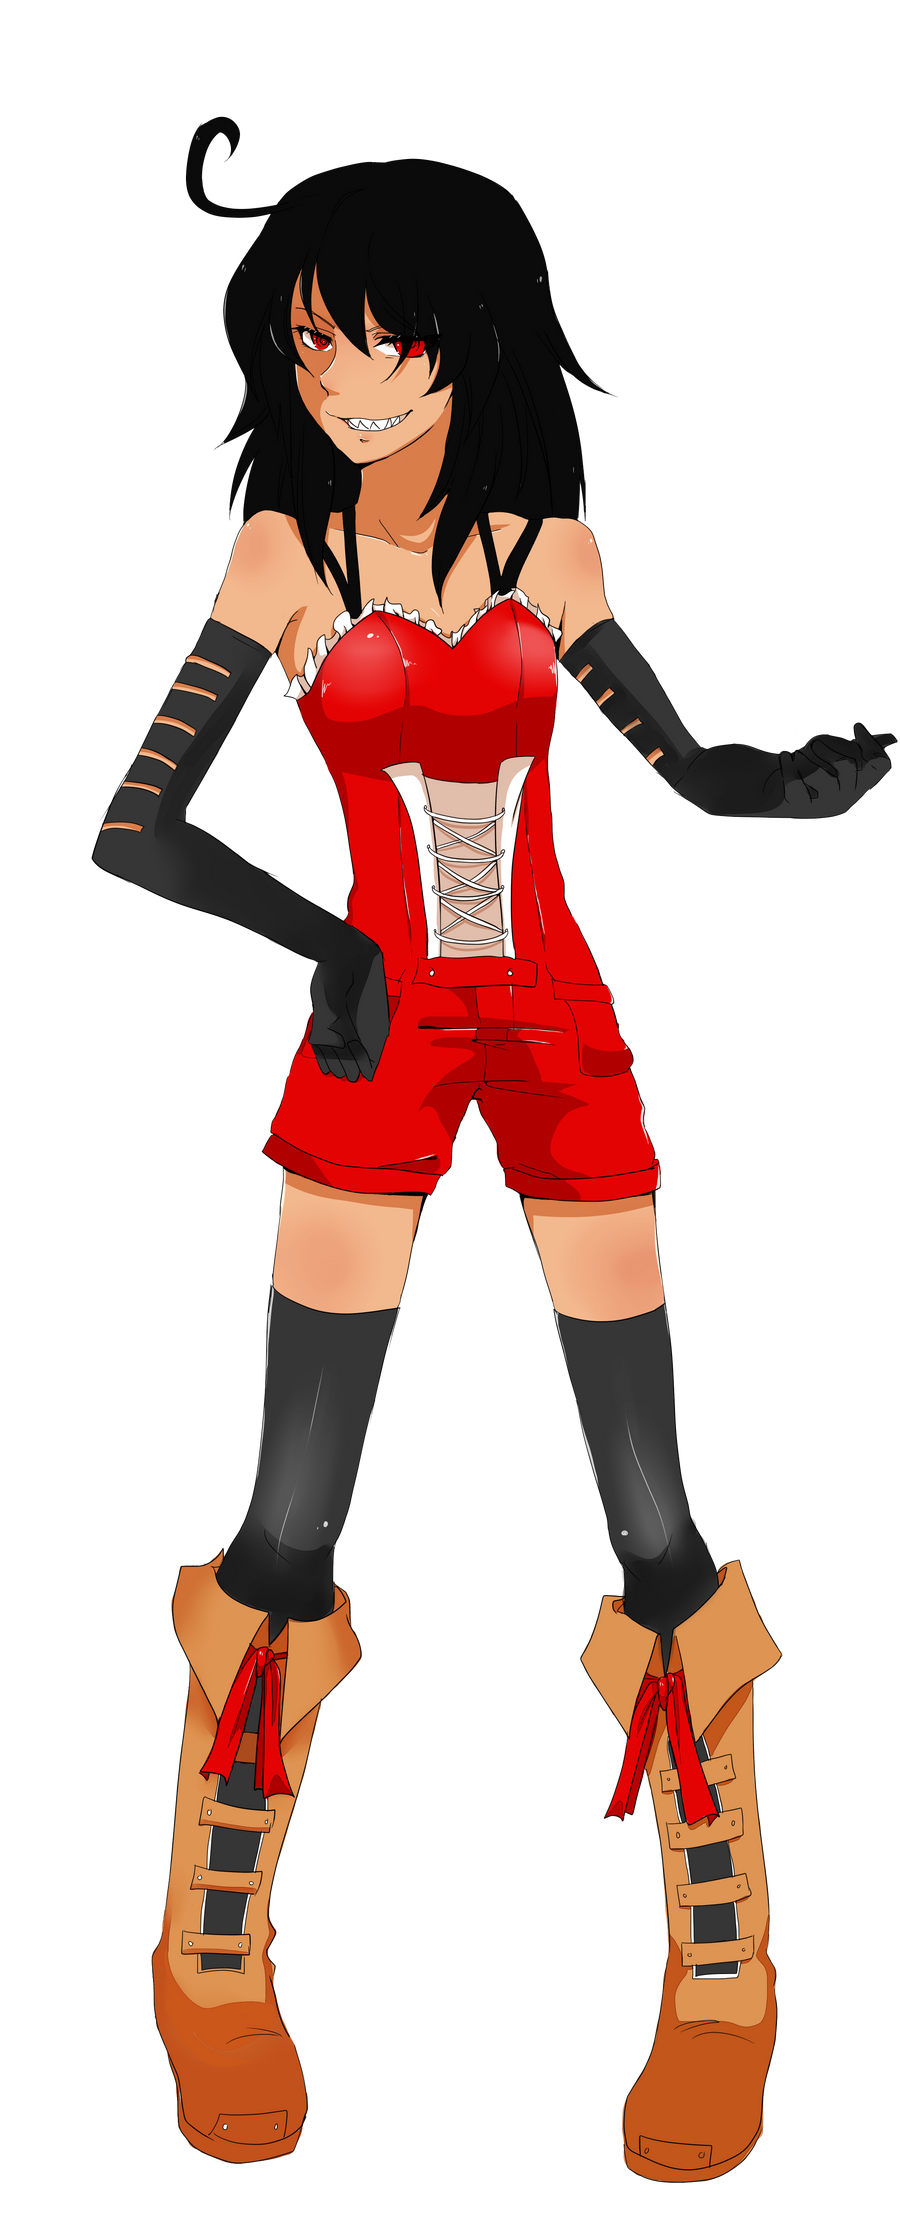 onomichi_saruokami_full_body_concept_by_gaysalt-d5f2fmd.png